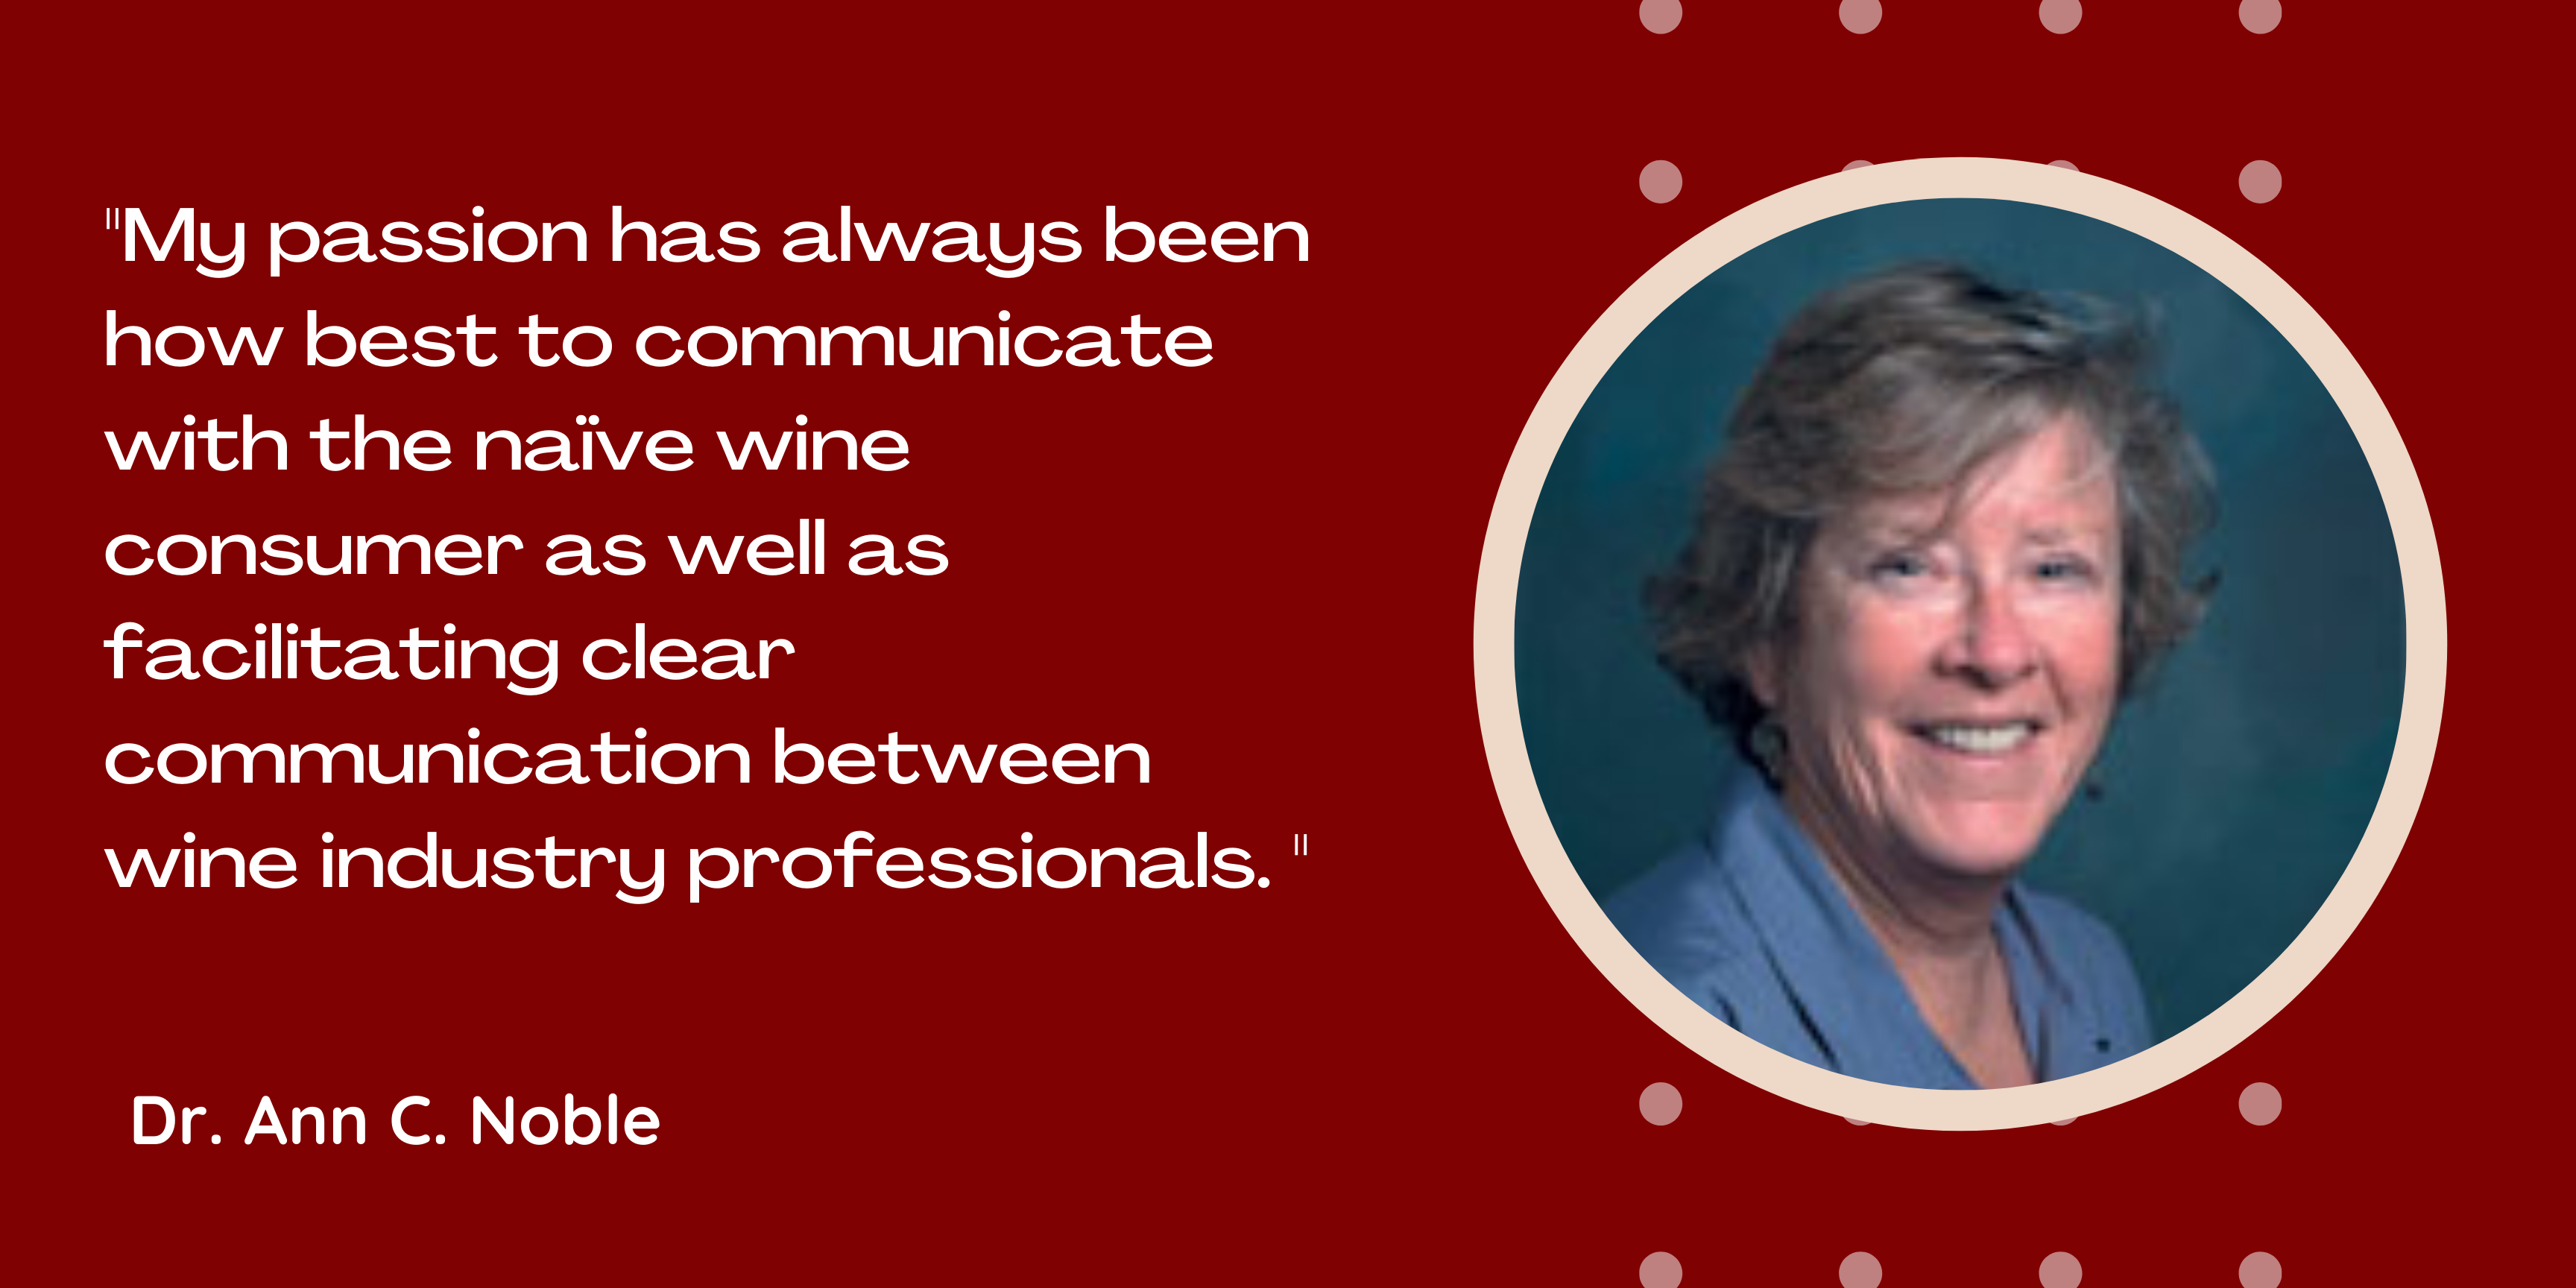 The image shows a citation by Ann Noble "My passion has always been how best to communicate with the naive wine consumer as well as facilitating clear communication between industry professionals."